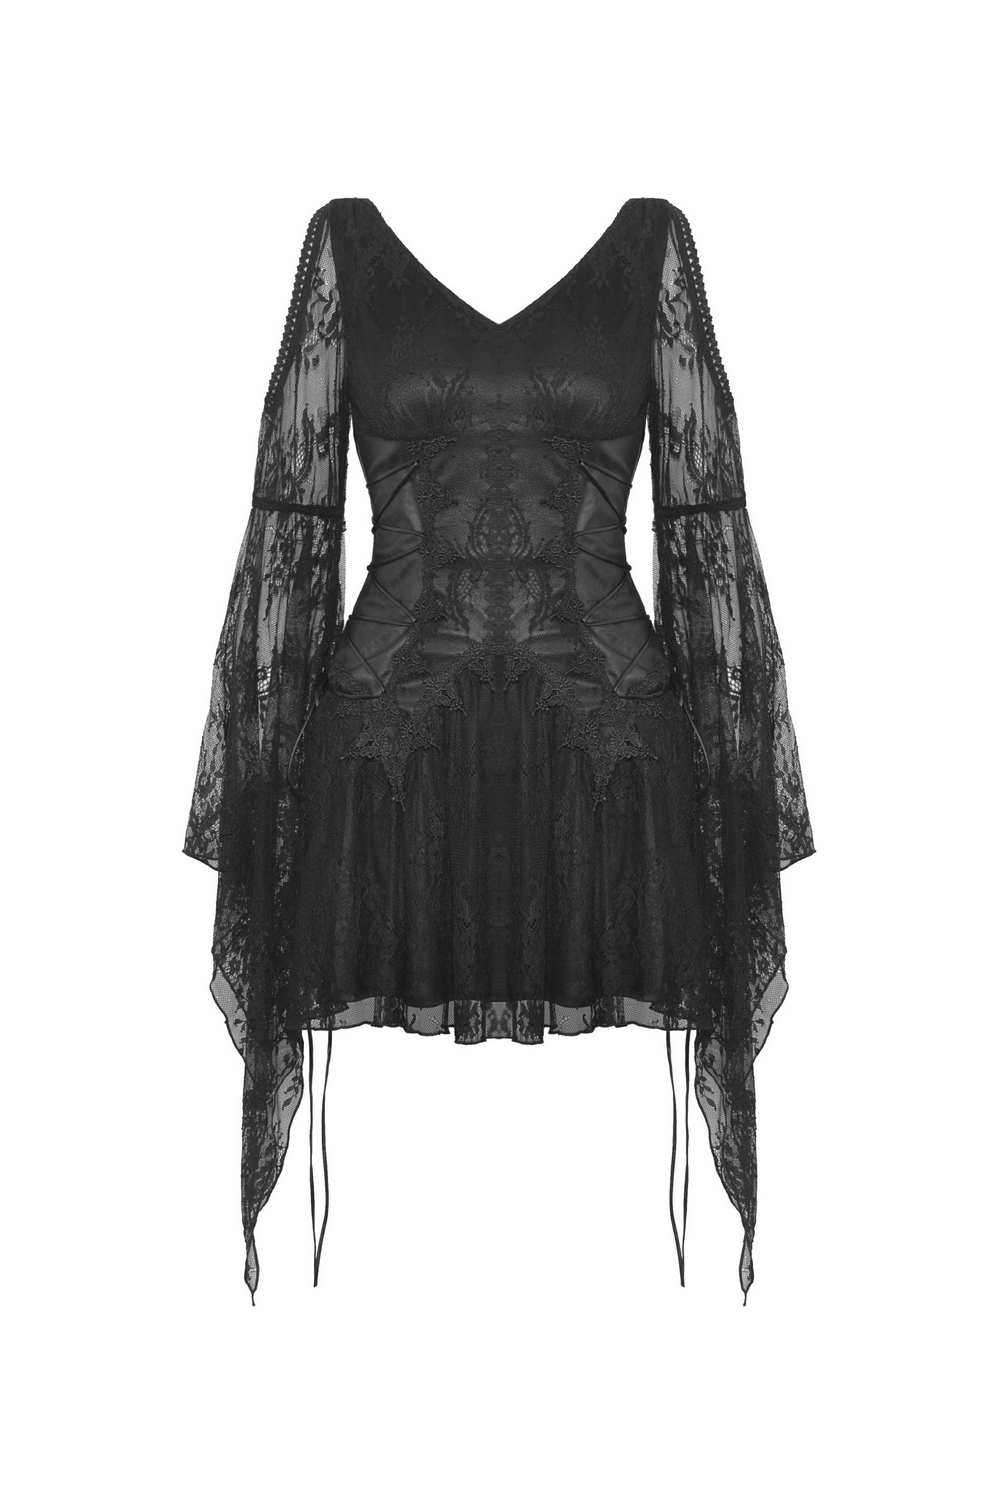 Gothic Lace Dress with Bell Sleeves and Fishnet Detail